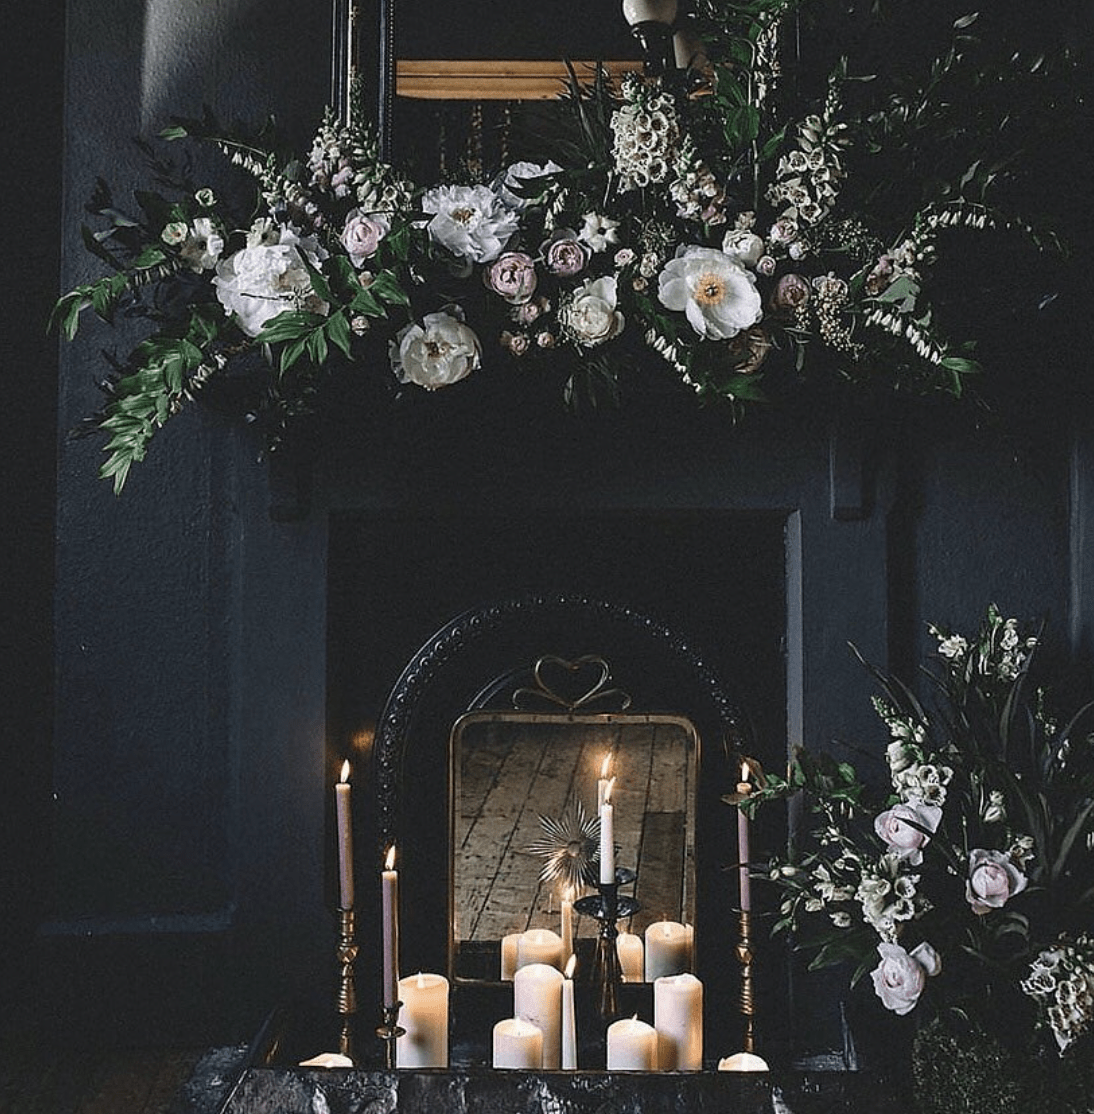 dark and moody fireplace with fl، arrangements and white lit candles inside completely black